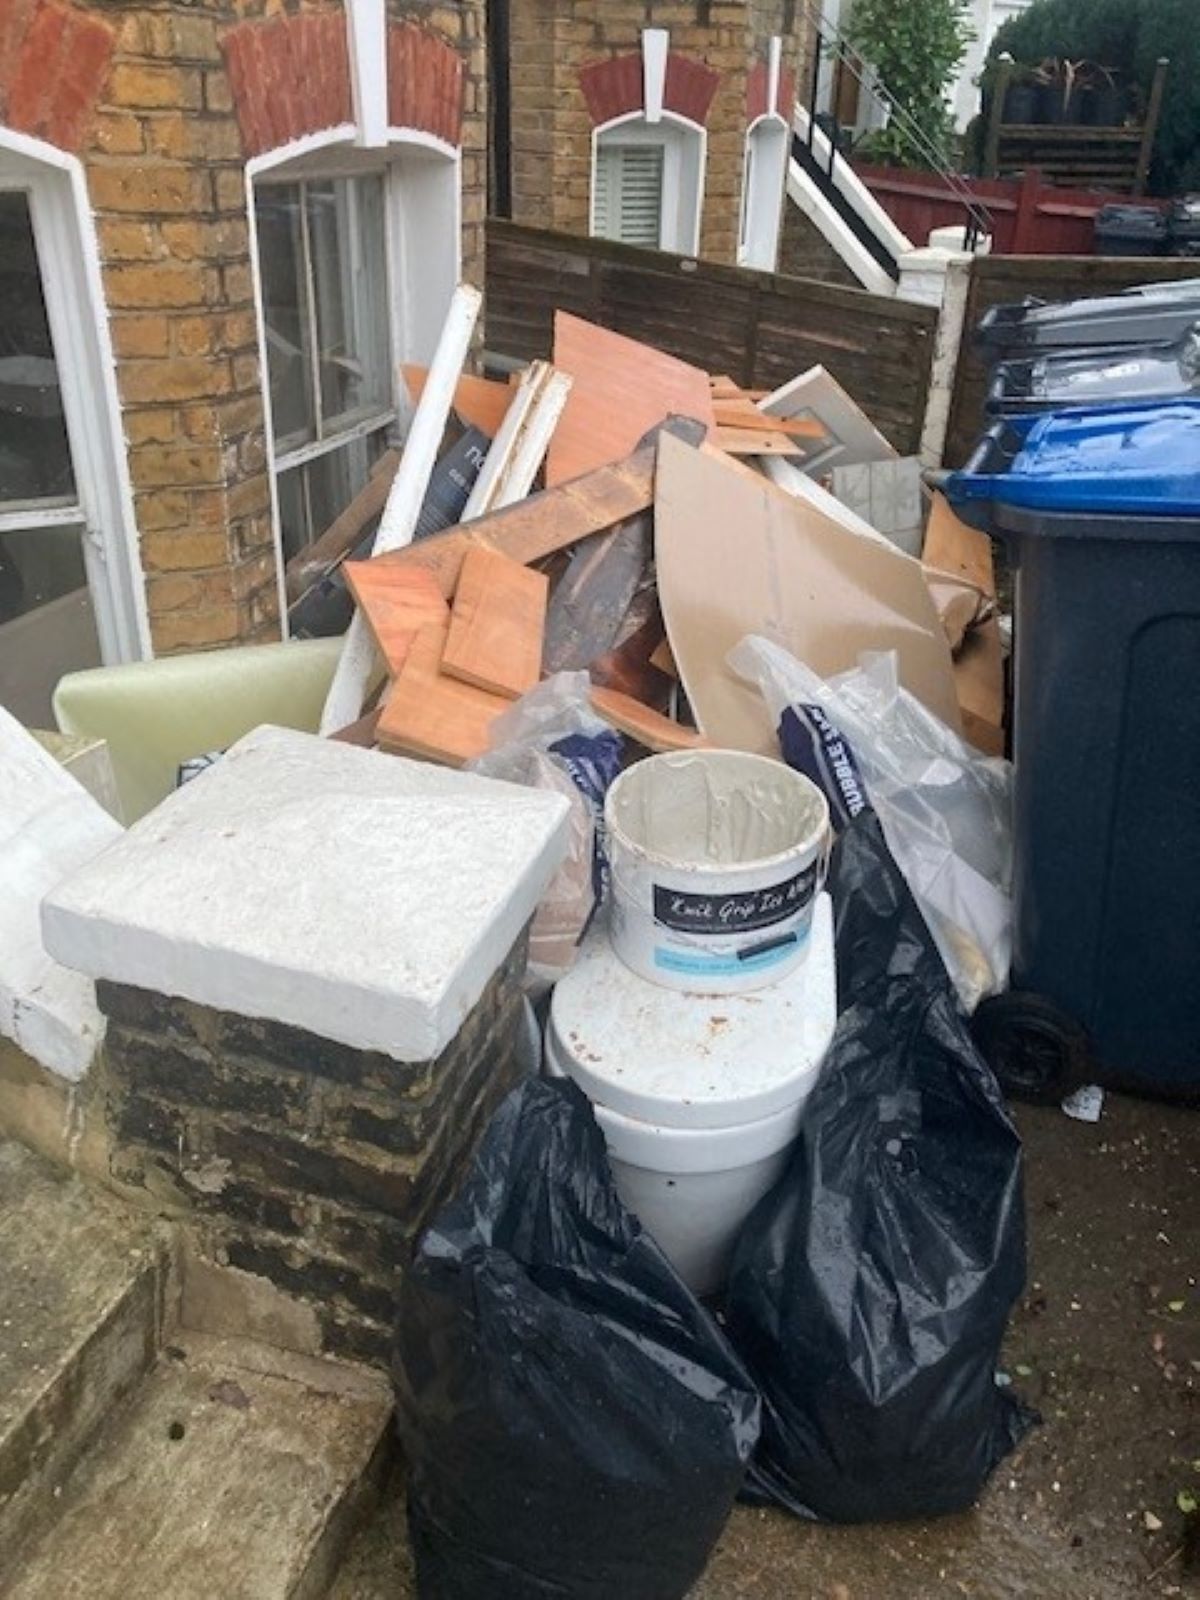 Rubbish Clearance Services in the South East of England and London